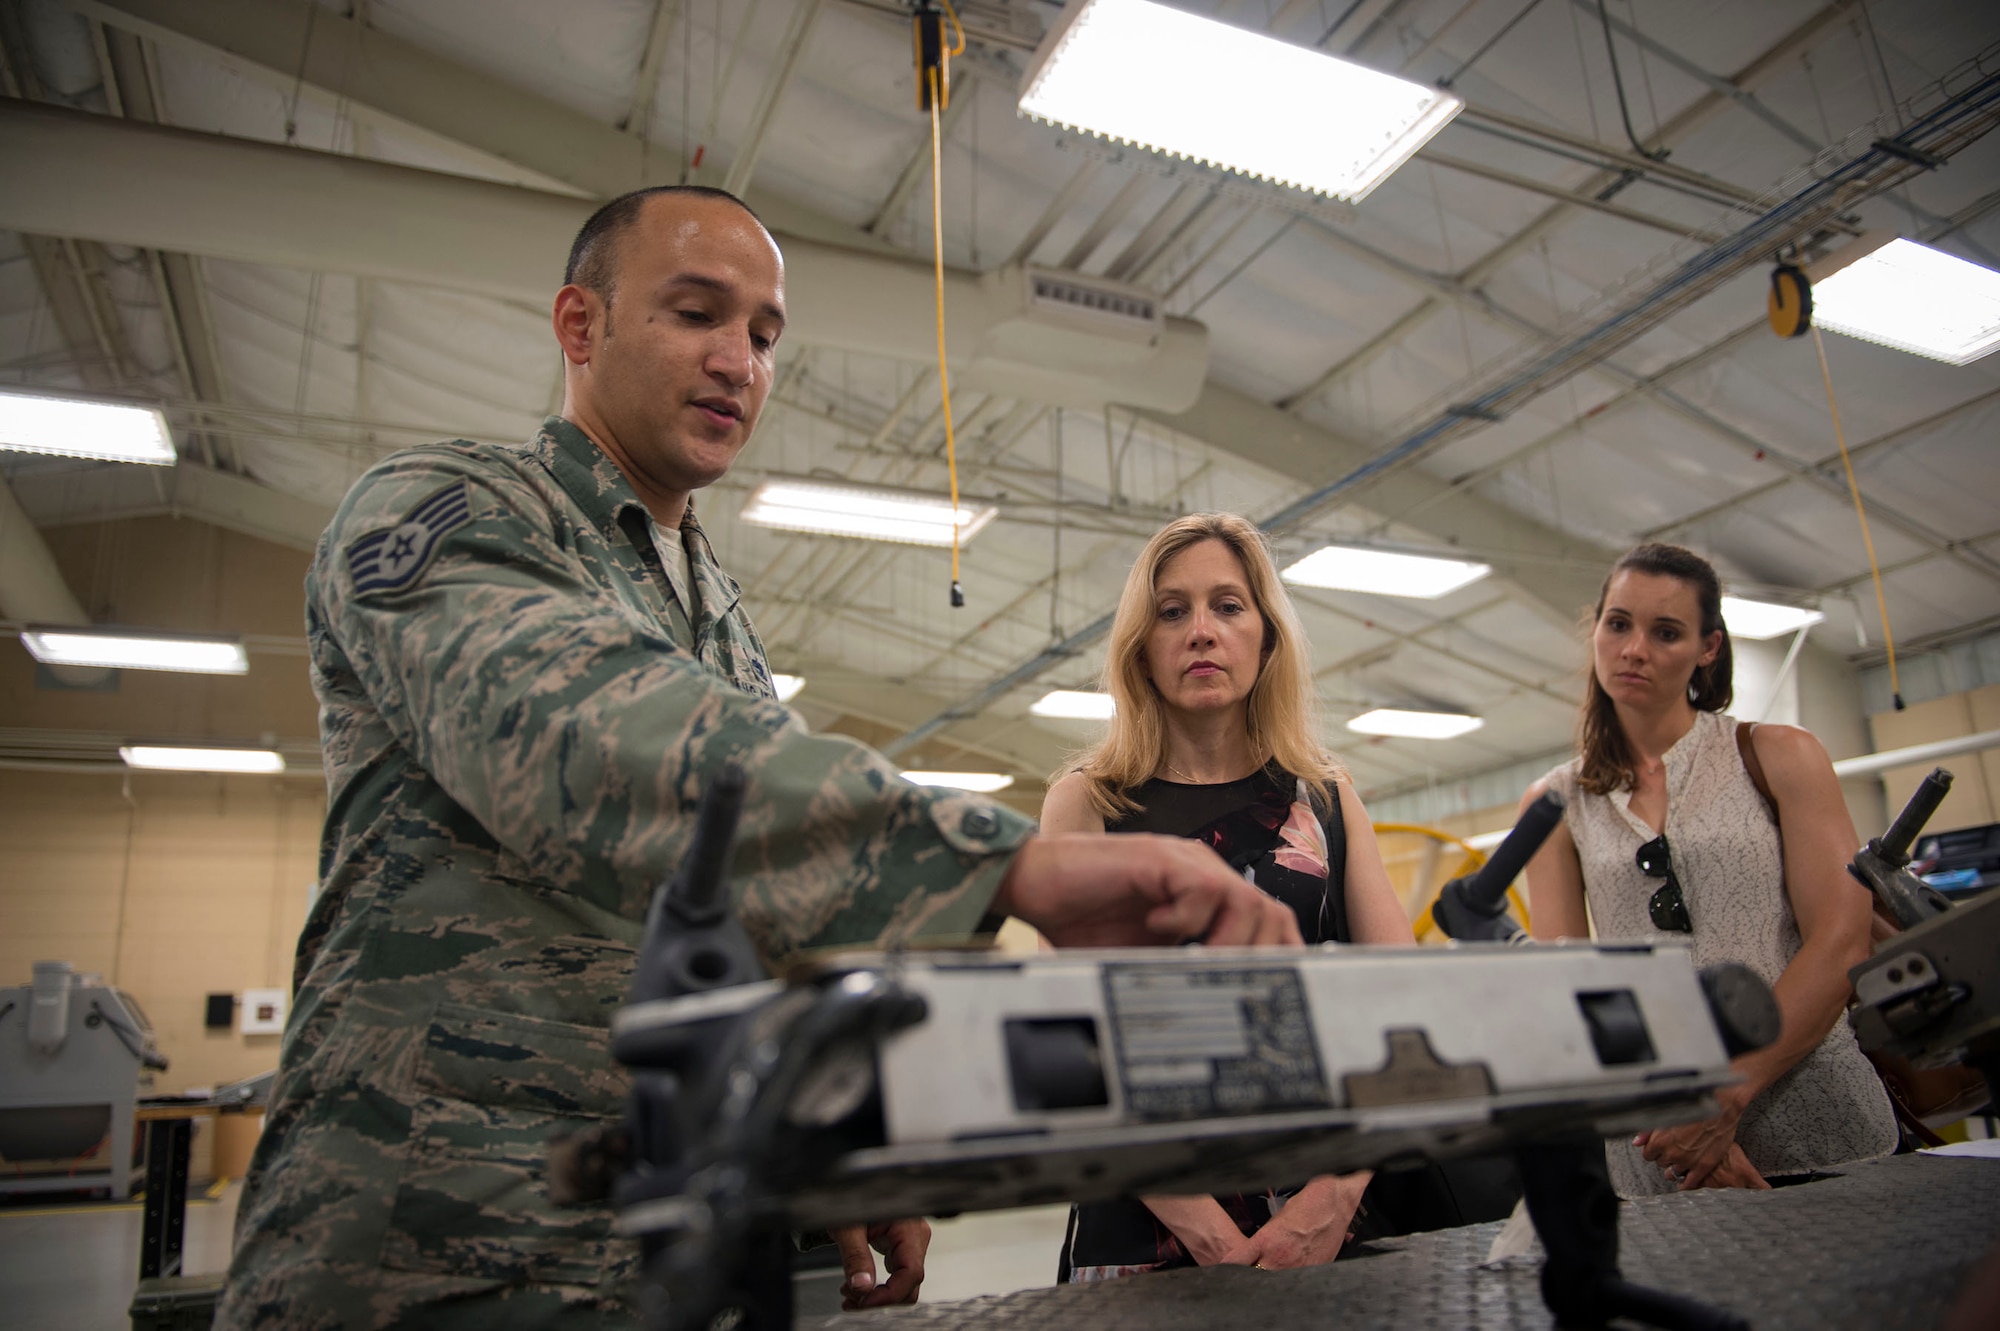 Staff Sgt. Brian Crews, left, 23d Maintenance Squadron alternate munitions equipment element supervisor, shows the functions of a mount rack for analysts from the RAND Corporation during a visit, Aug. 8, 2018, at Moody Air Force Base, Ga. RAND integrated with Moody’s rescue, flying and maintenance professionals to examine firsthand Air Force operations. This familiarization helps RAND develop their analysis to ultimately present policy recommendations to Air Force decision makers. Since 1948, RAND has performed analysis for the U.S. Air Force. (U.S. Air Force photo by Senior Airman Greg Nash)